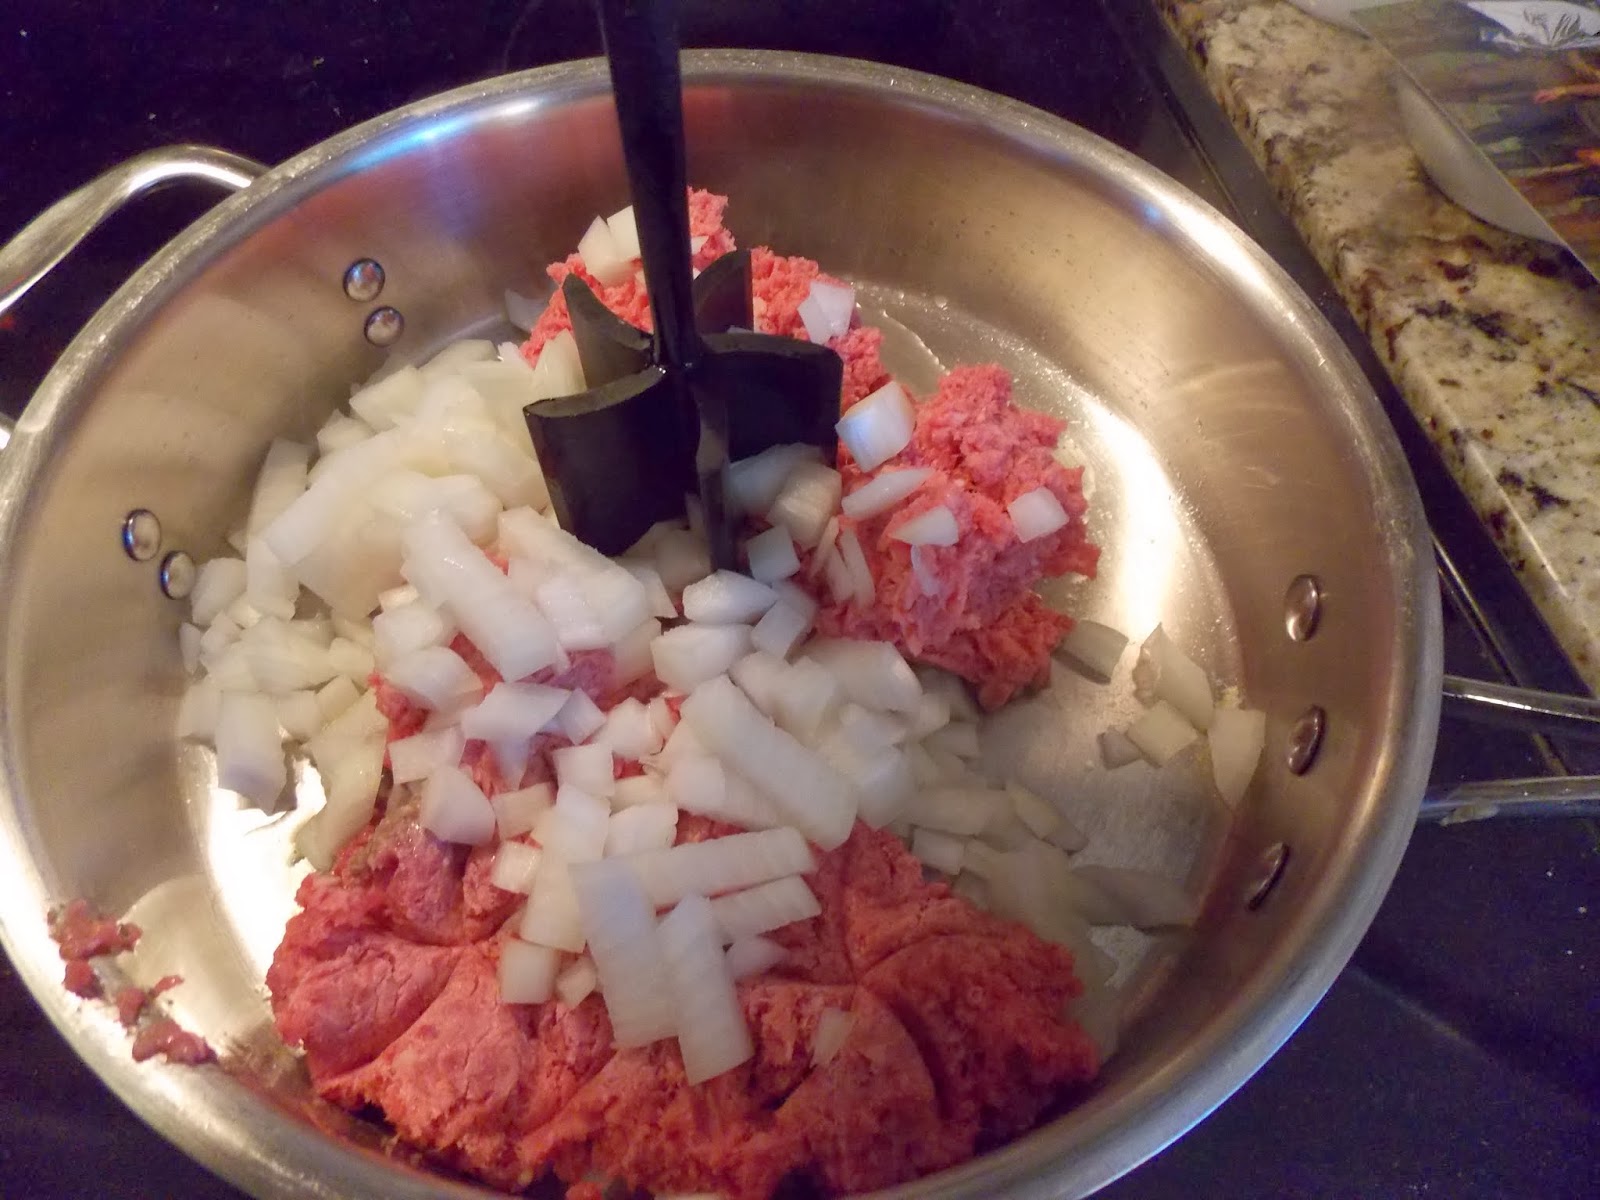 10 Ways to Use the Mix 'N Chop - Pampered Chef Blog